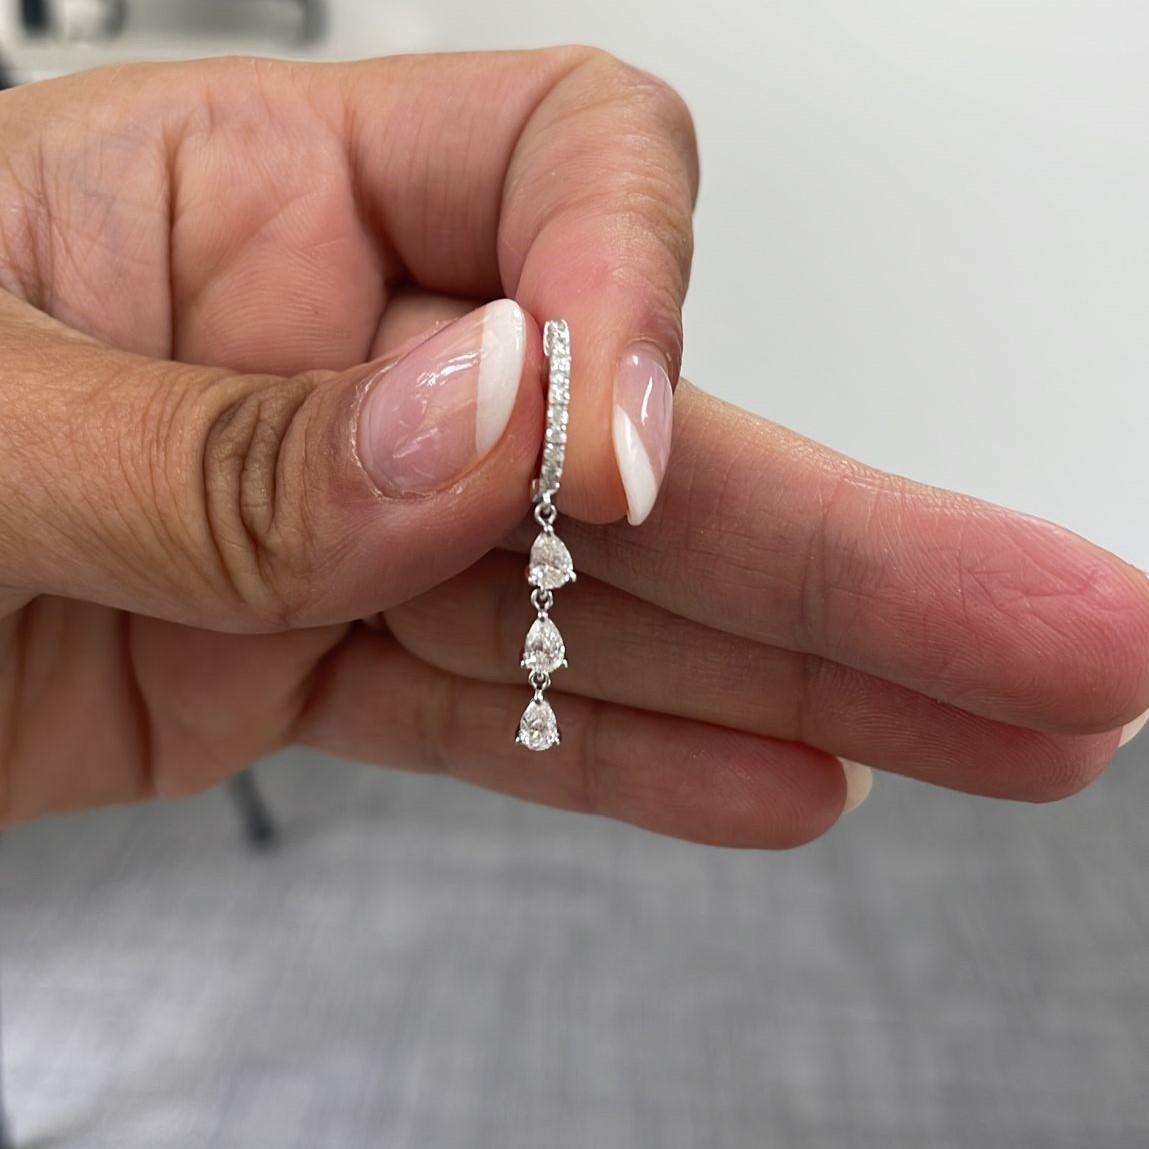 Quality Diamond Huggies: Made from real 14k gold and  glittering natural white approximately 1 ct.  diamonds, featuring Pear-shaped white diamonds on the earrings with a color and clarity of GH-SI.   
 Surprise Your Loved One with Our Diamond Inside